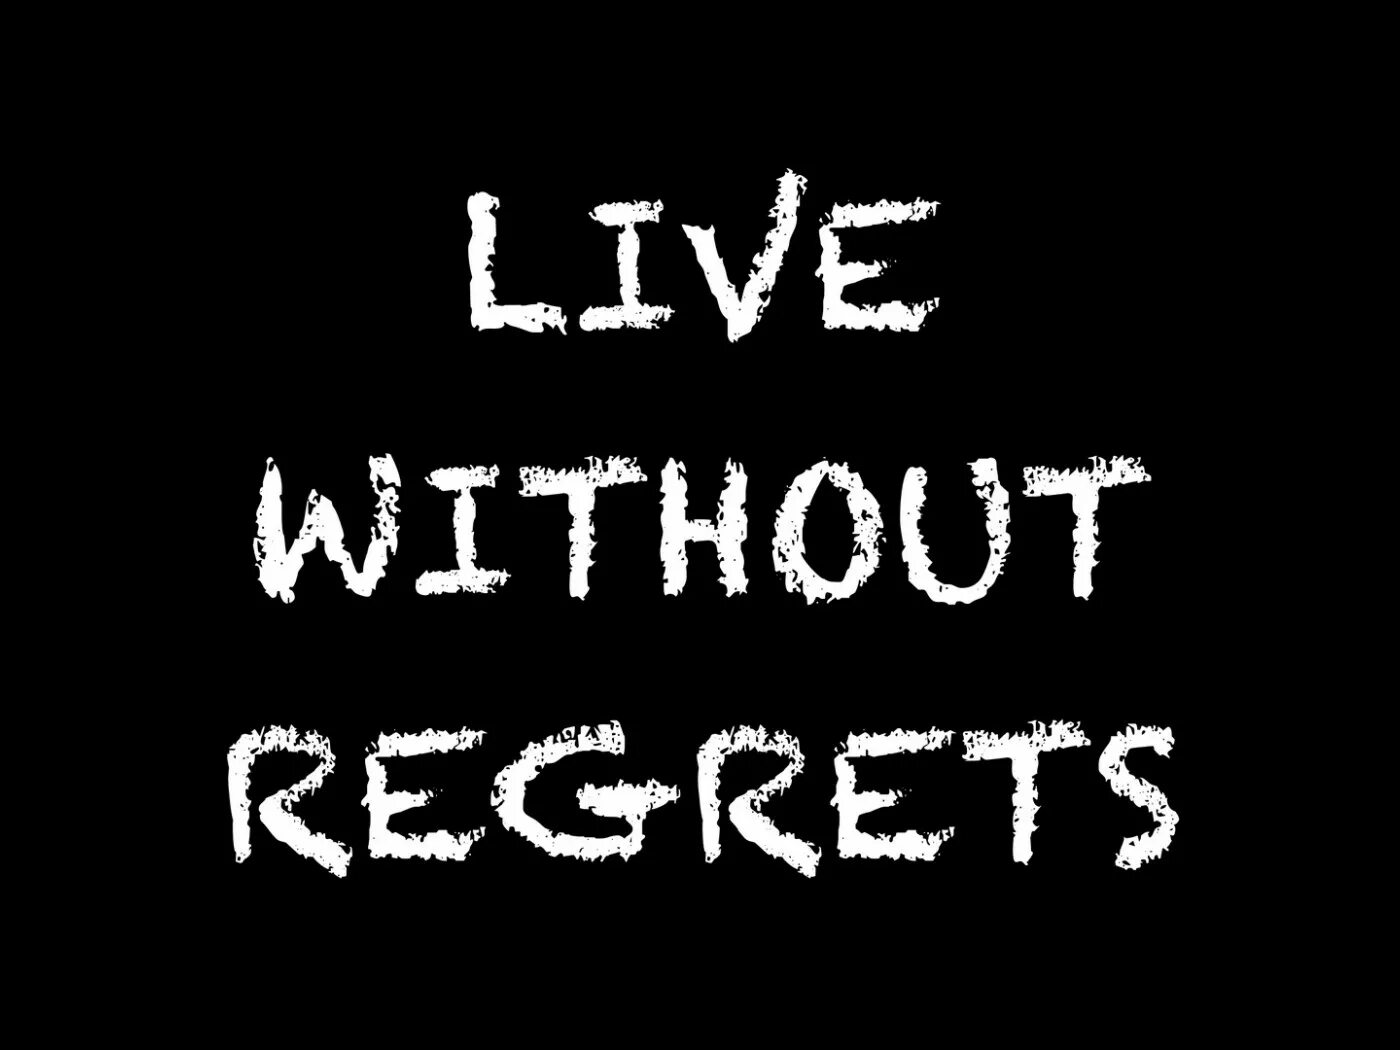 Without regretting